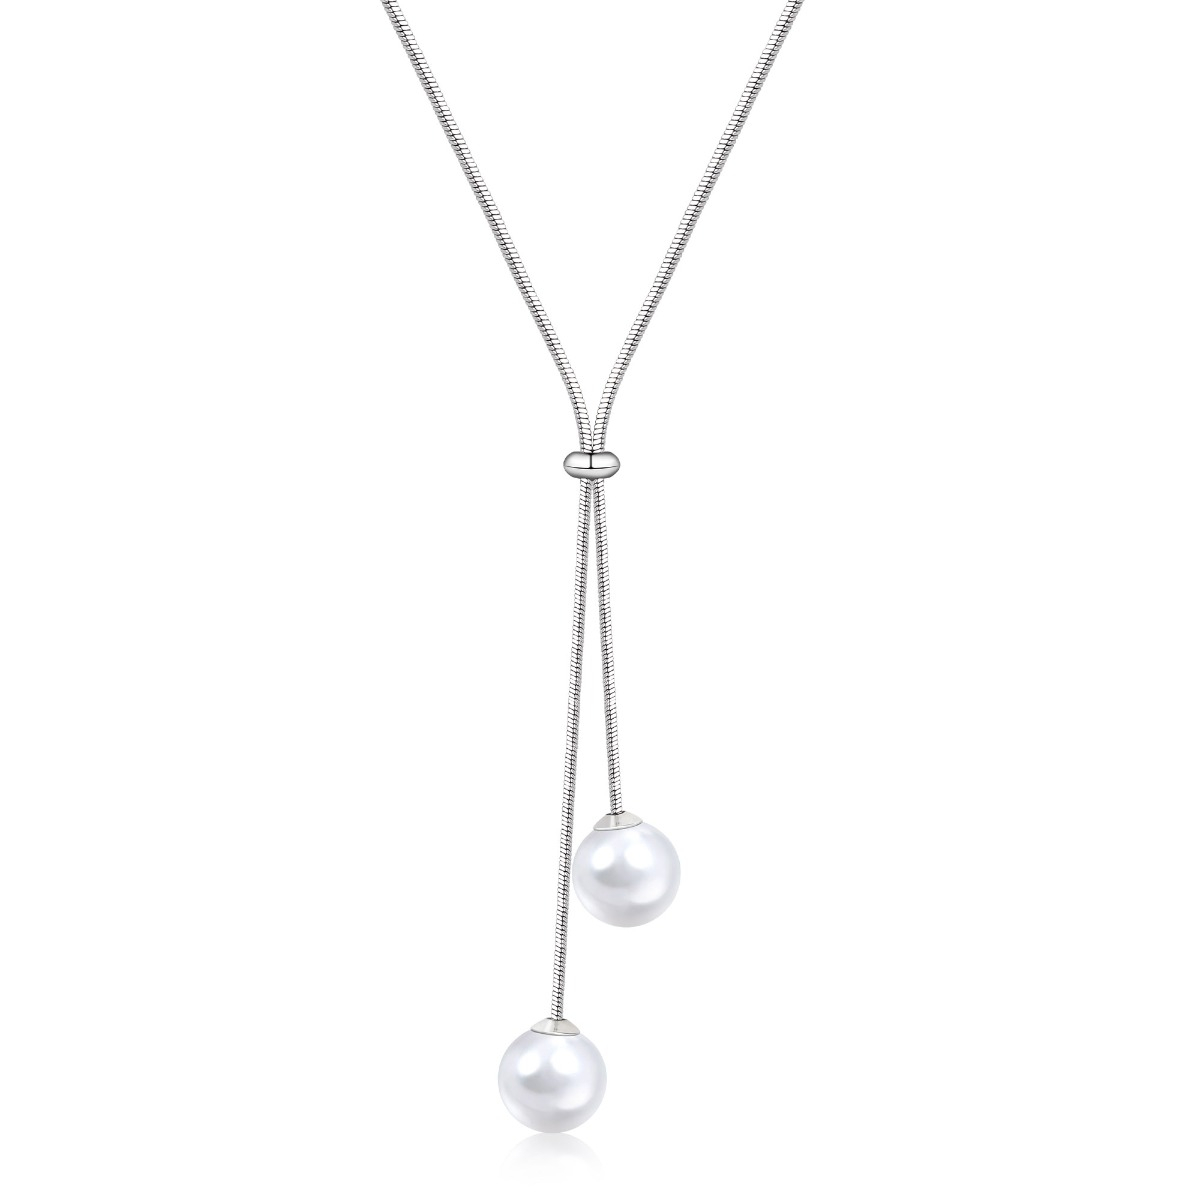 Delicate Lariat Silvertone Necklace with Faux Pearl Drop Pendant